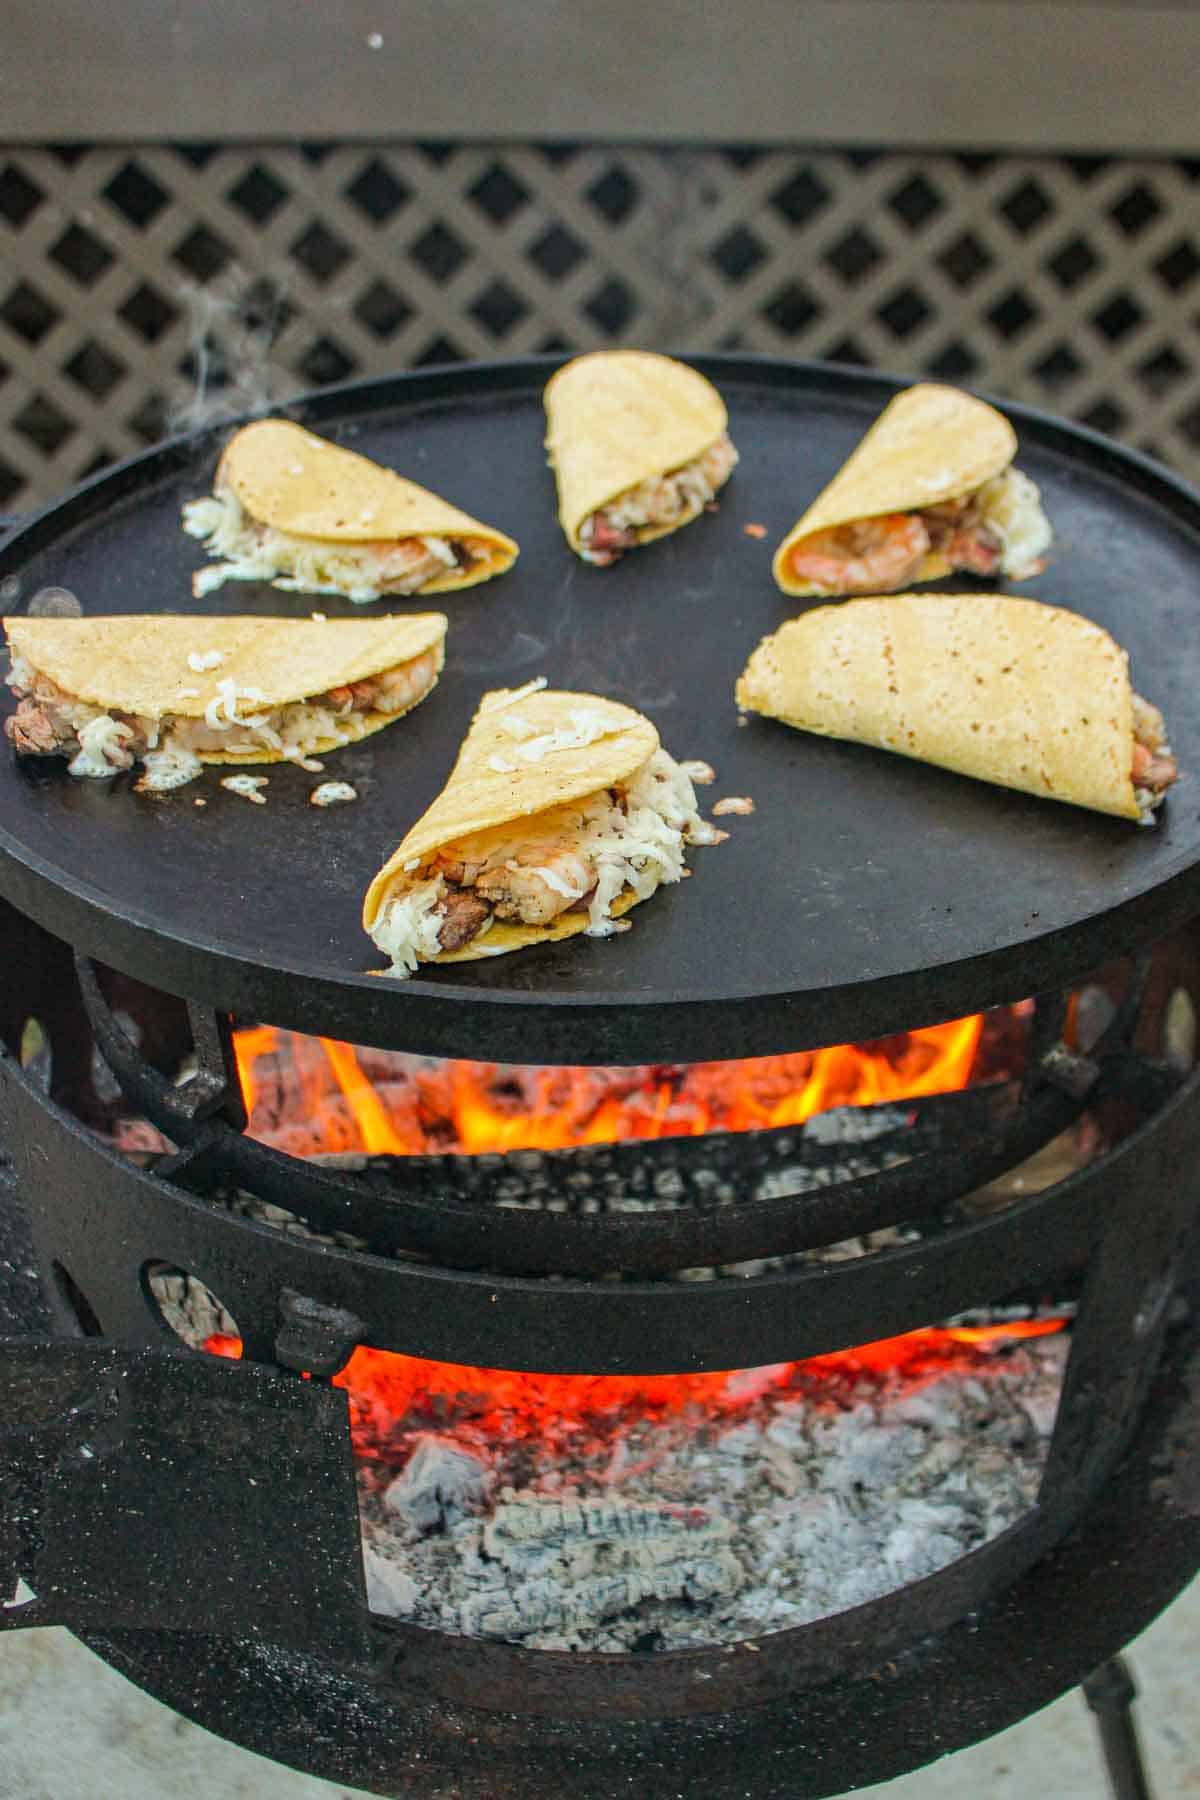 The crispy steak and shrimp tacos sitting assembled on the plancha over the fire.